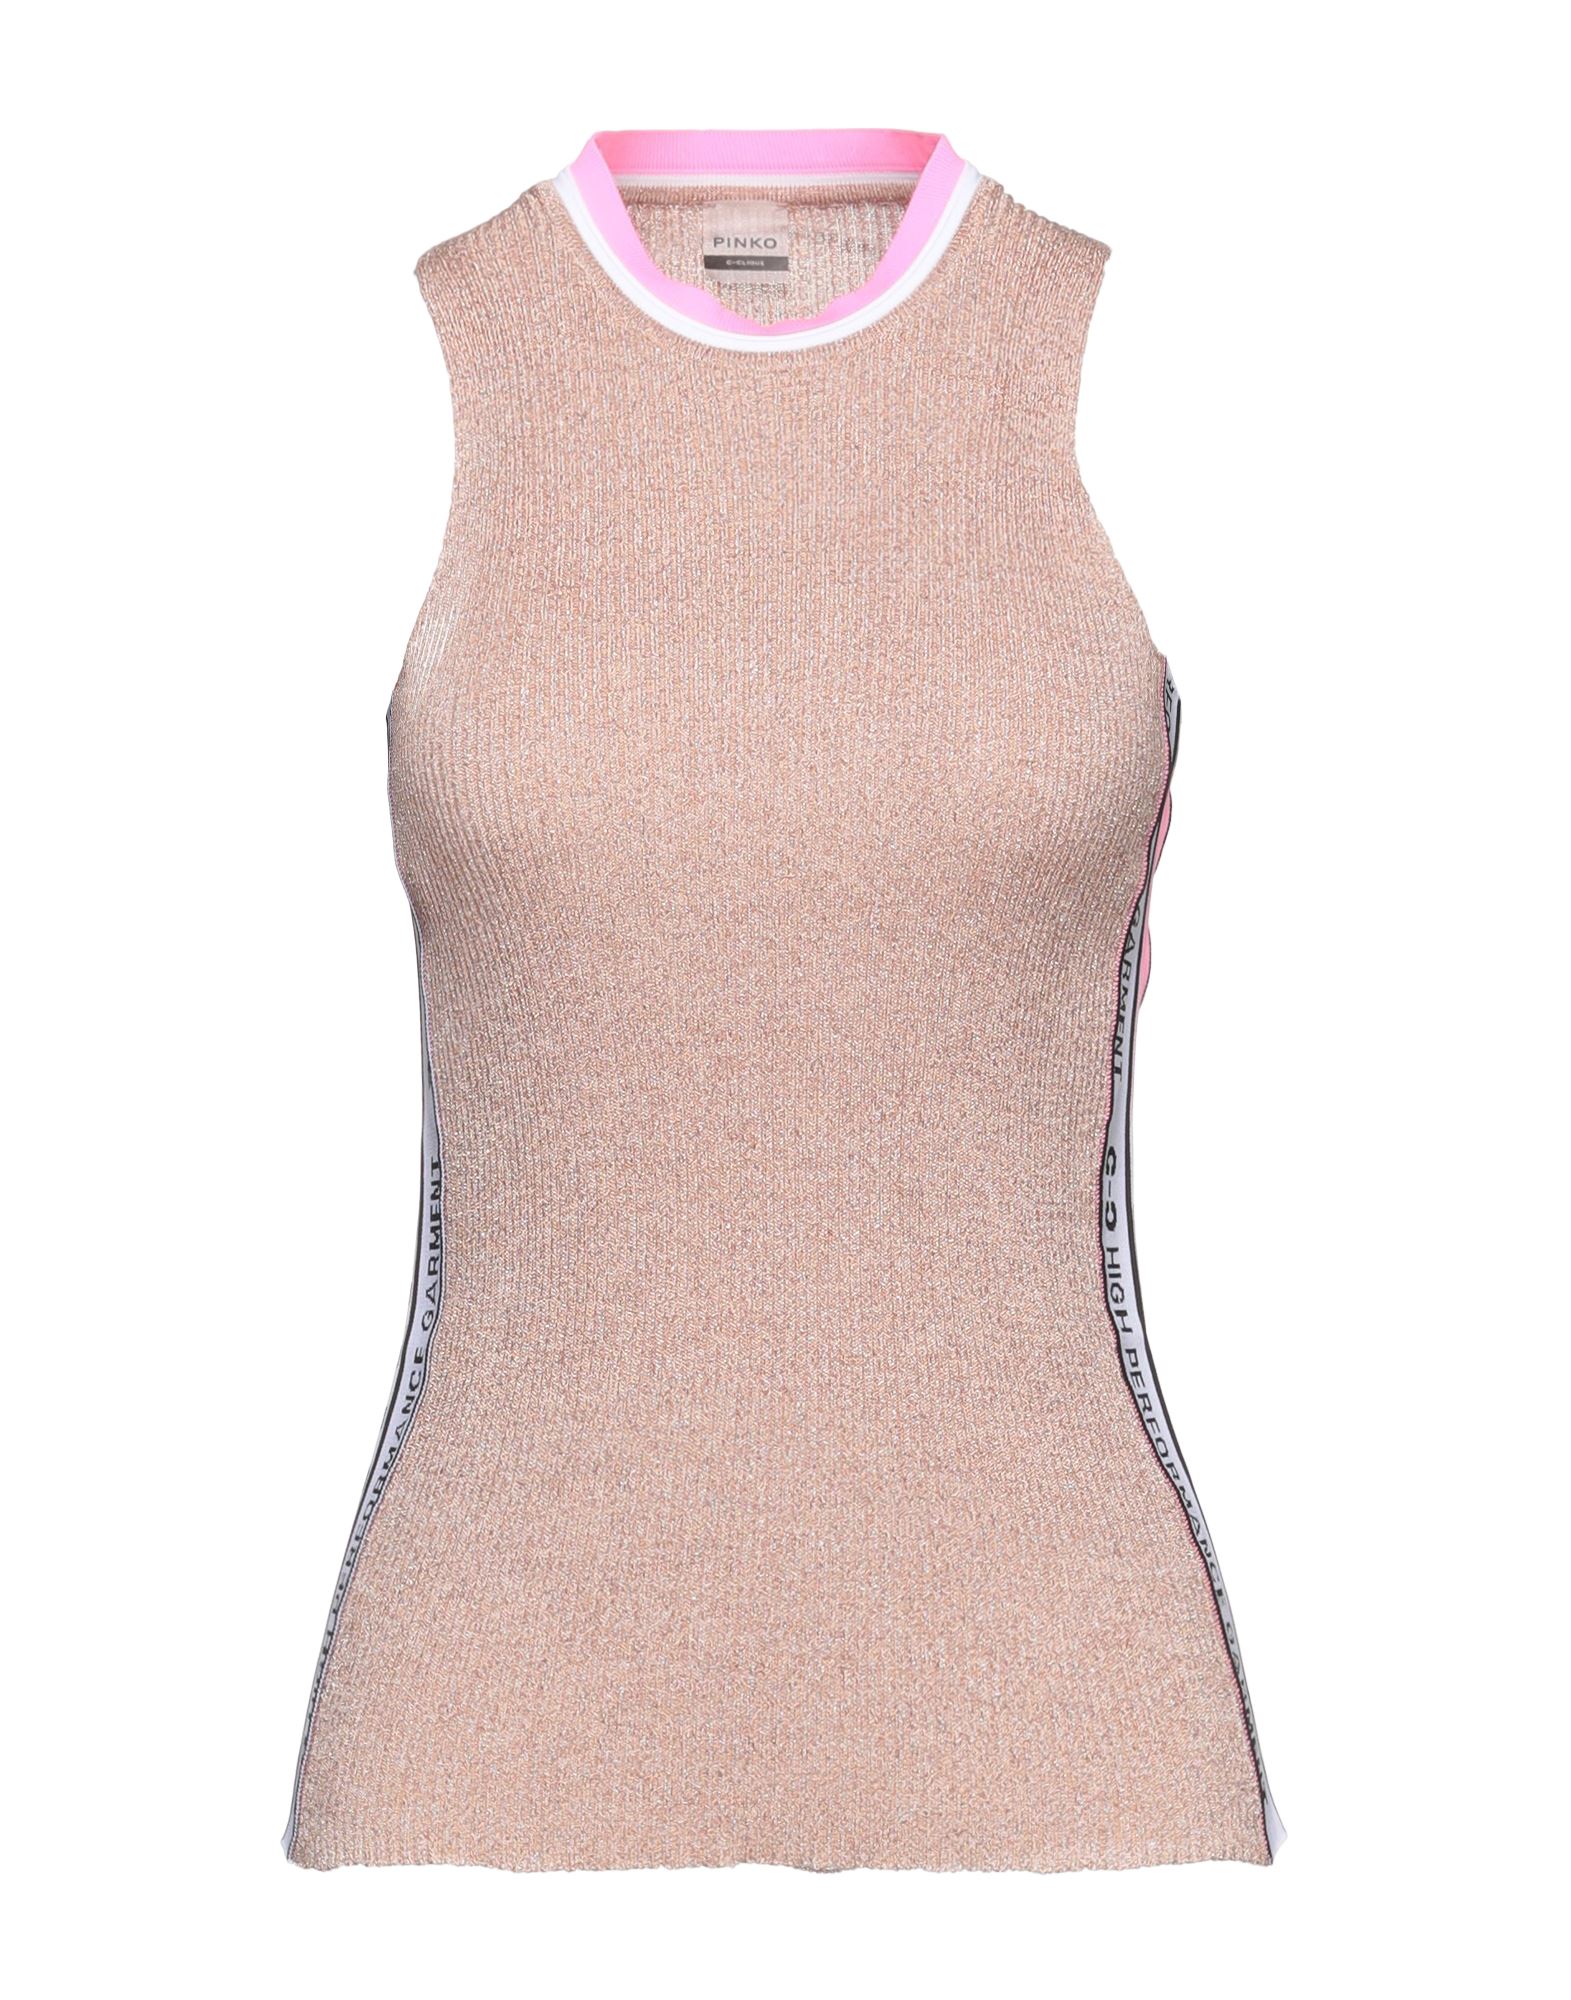 C-clique Tank Tops In Pale Pink